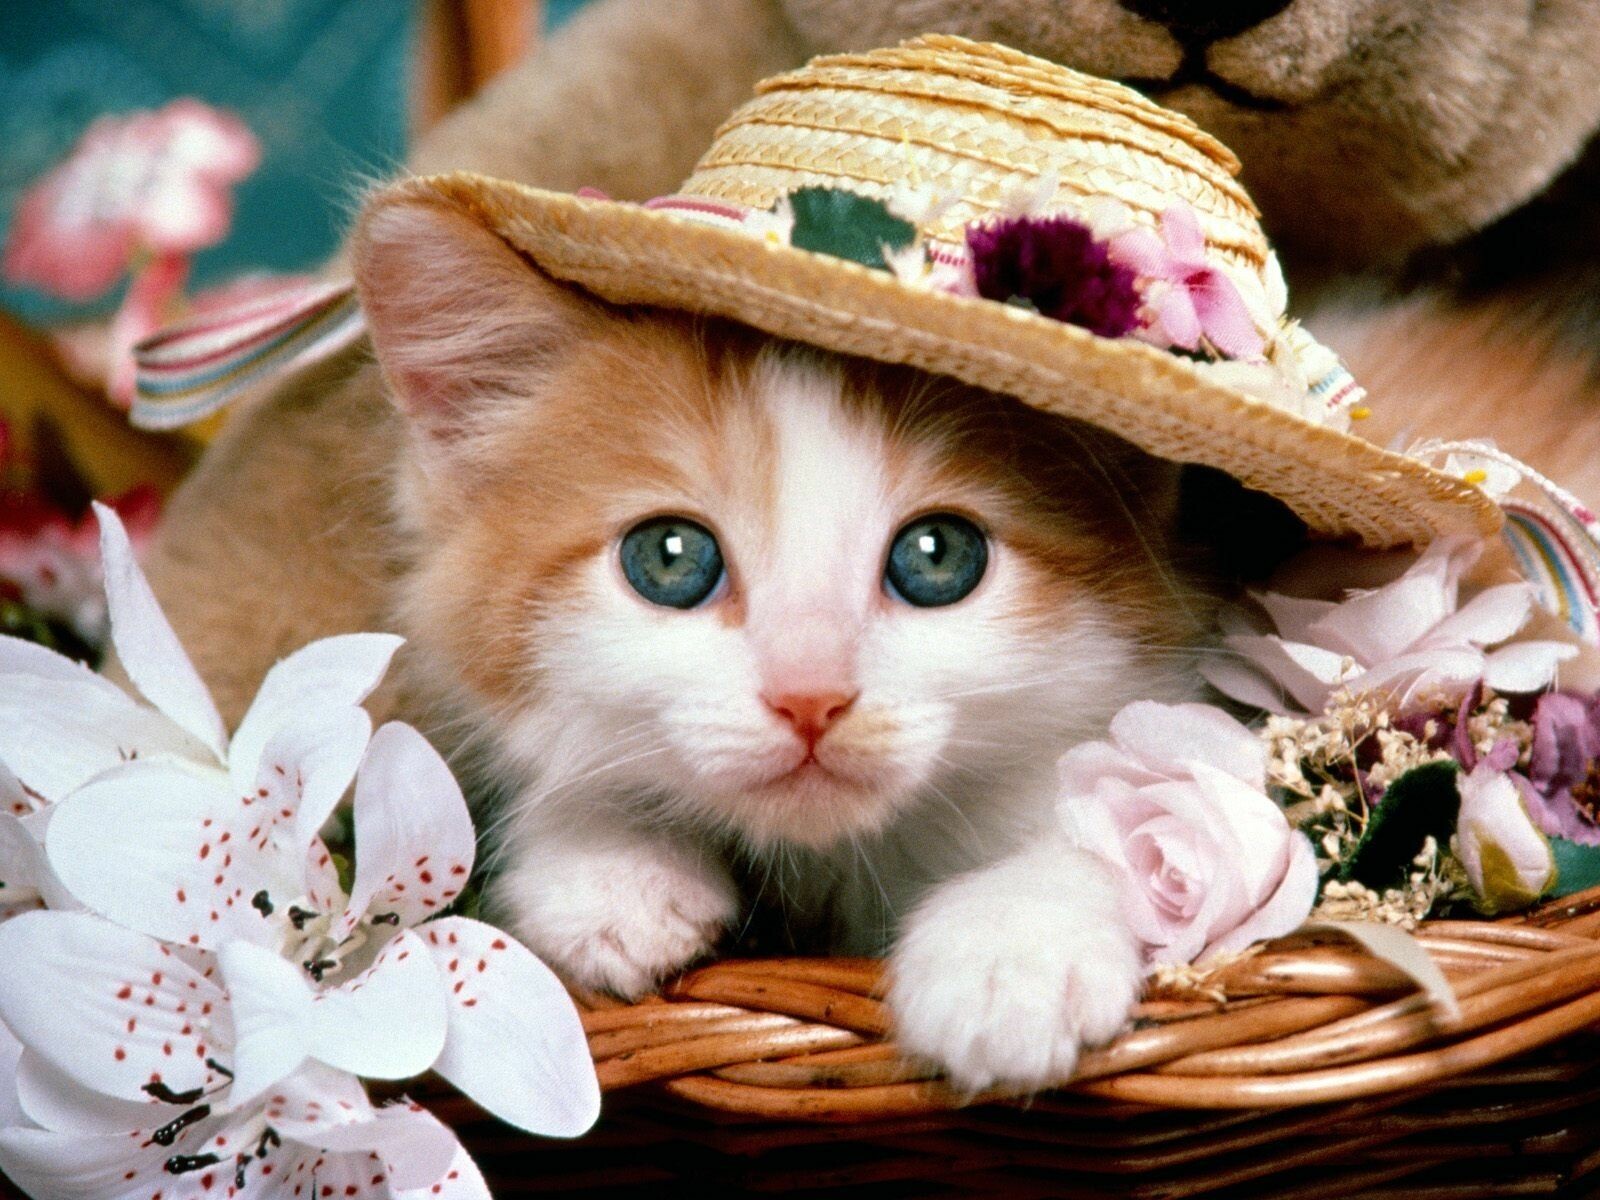 Adorable Cute Kitten Wallpapers Background, Cutest Cat Picture Ever  Background Image And Wallpaper for Free Download